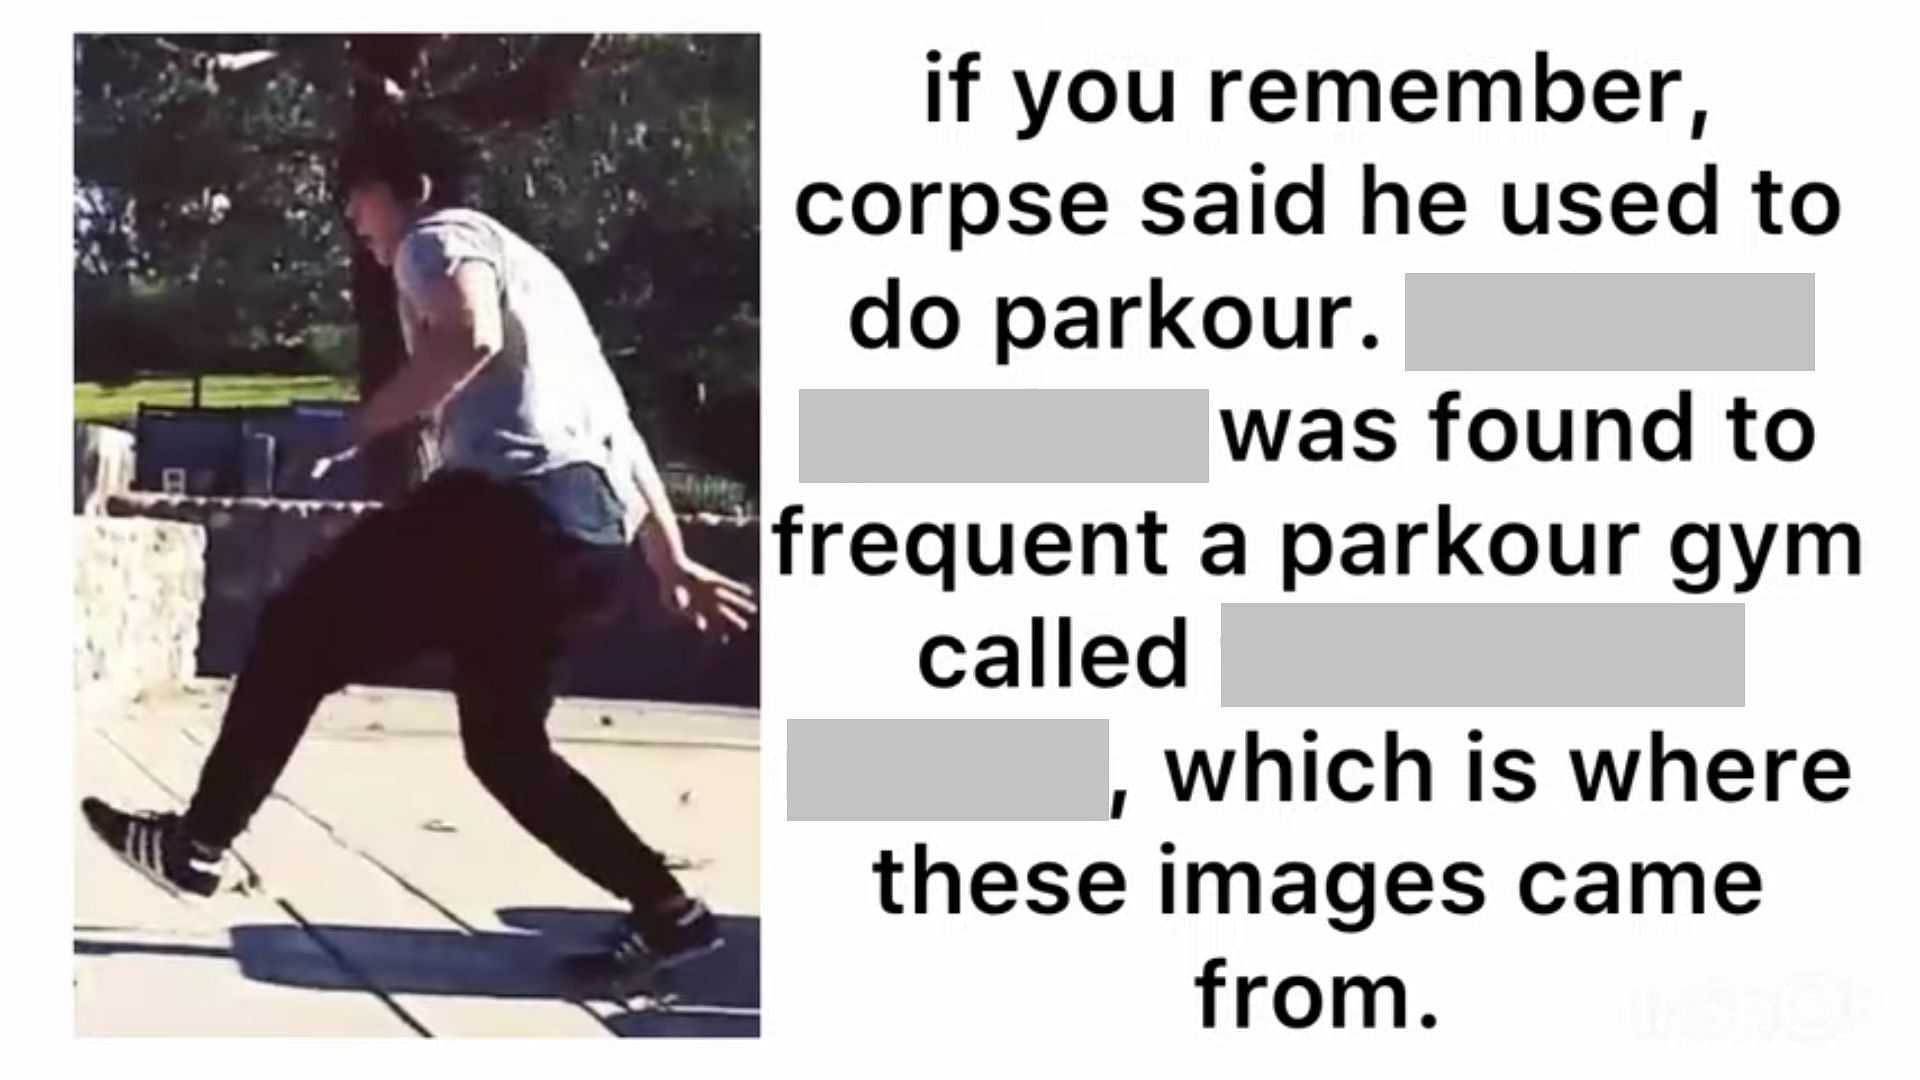 Corpse Husband&#039;s older parkour pictures were leaked